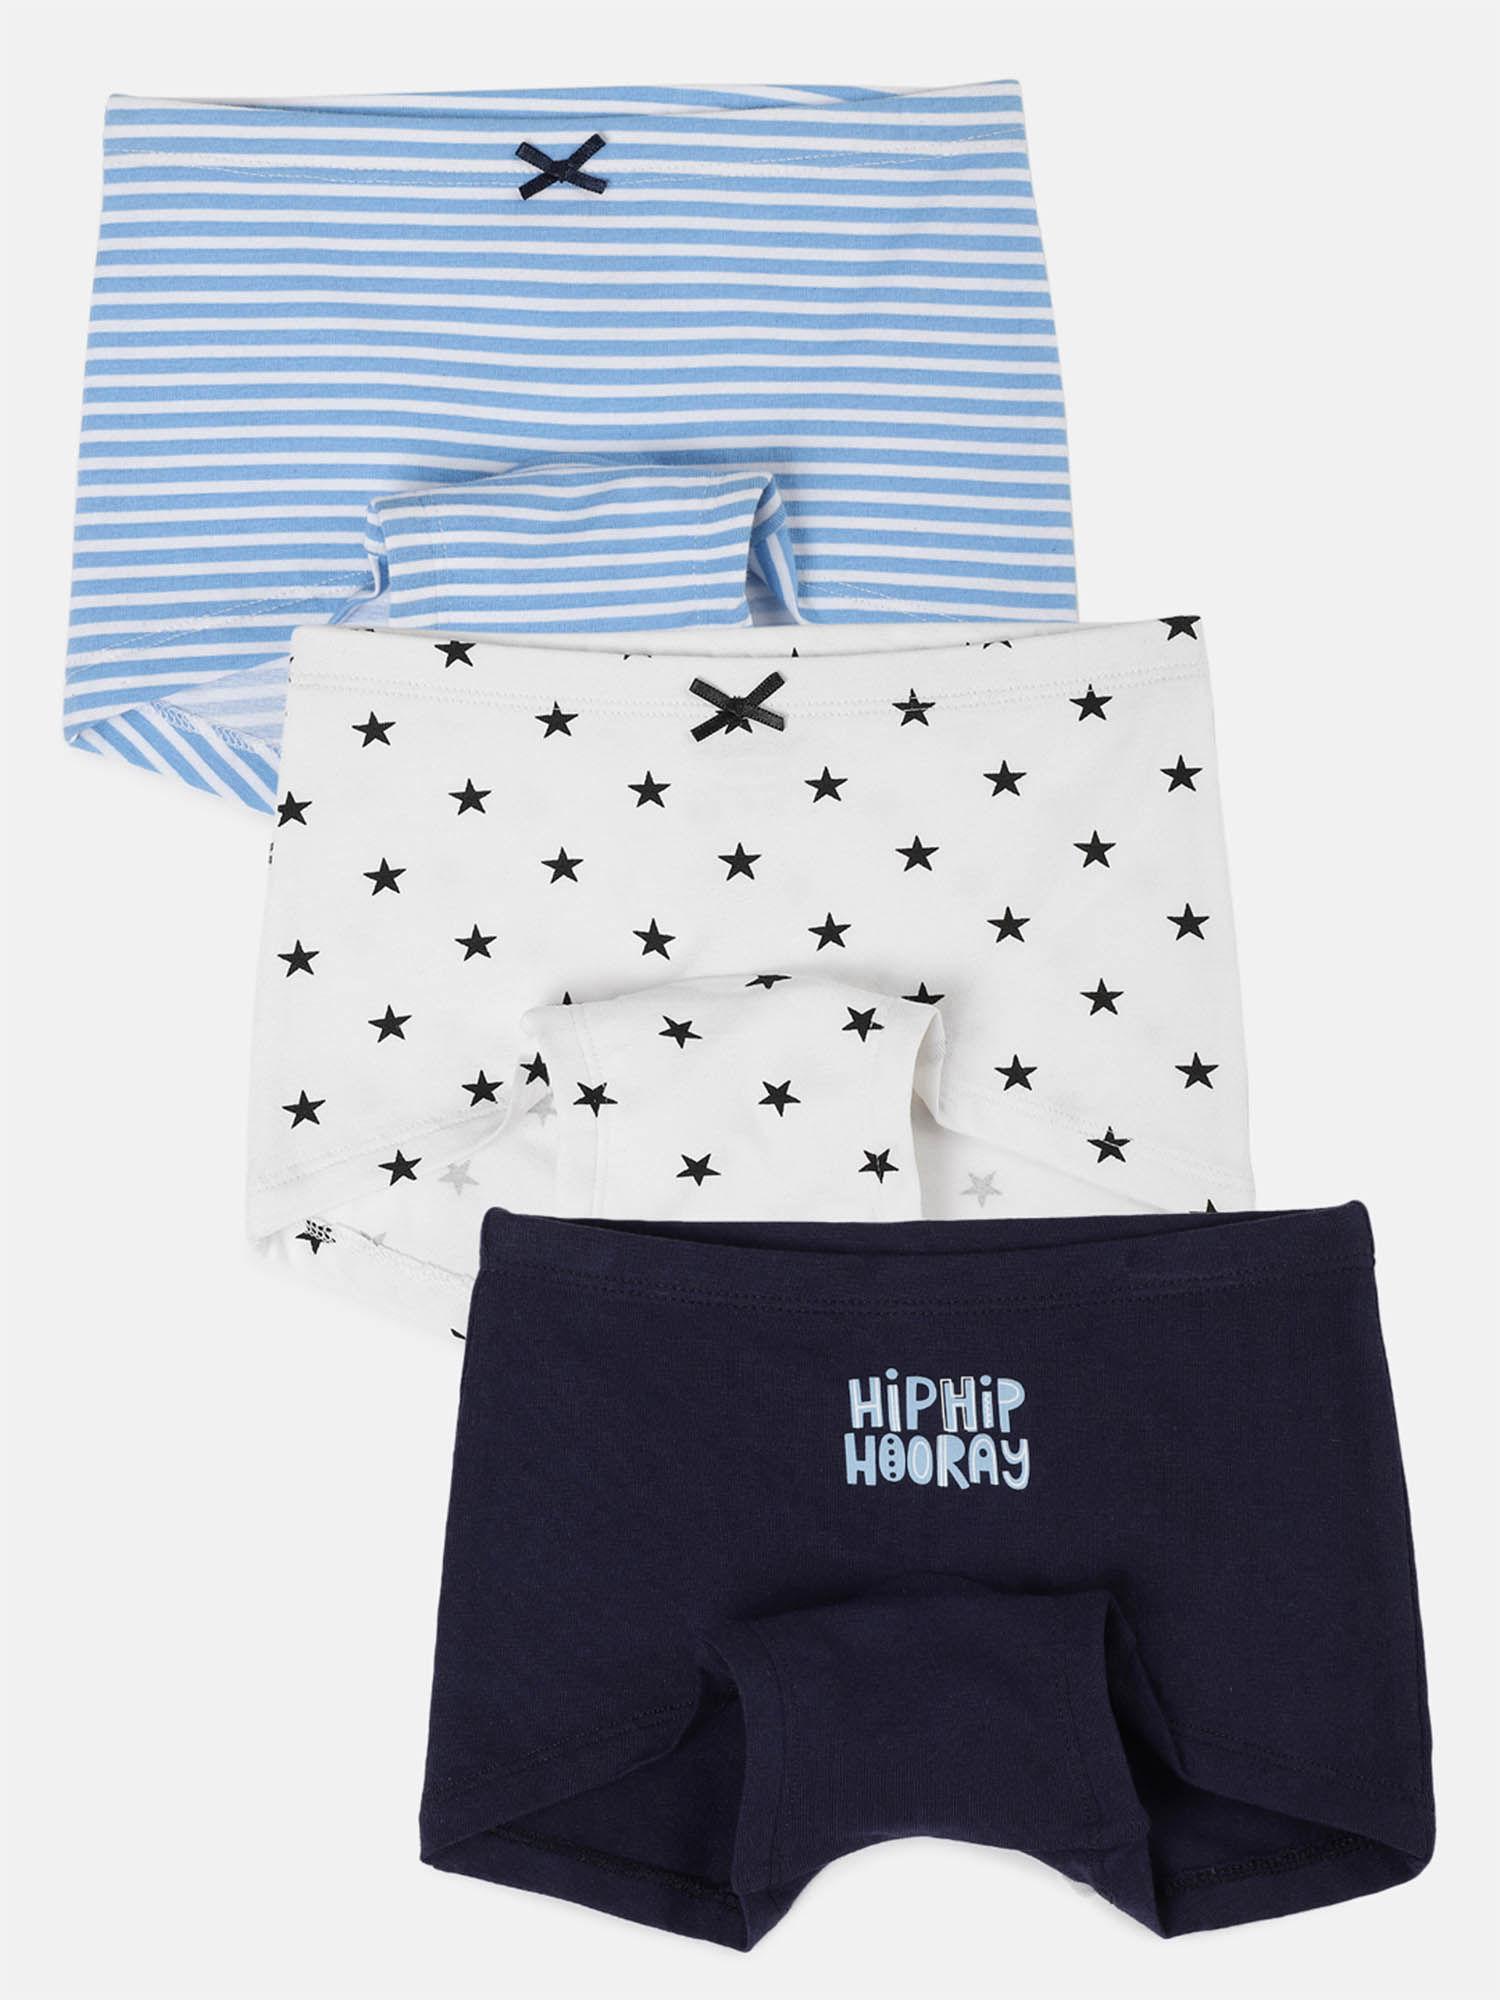 girls-printed-cotton-boxer-blue,-grey-and-navy-(pack-of-3)